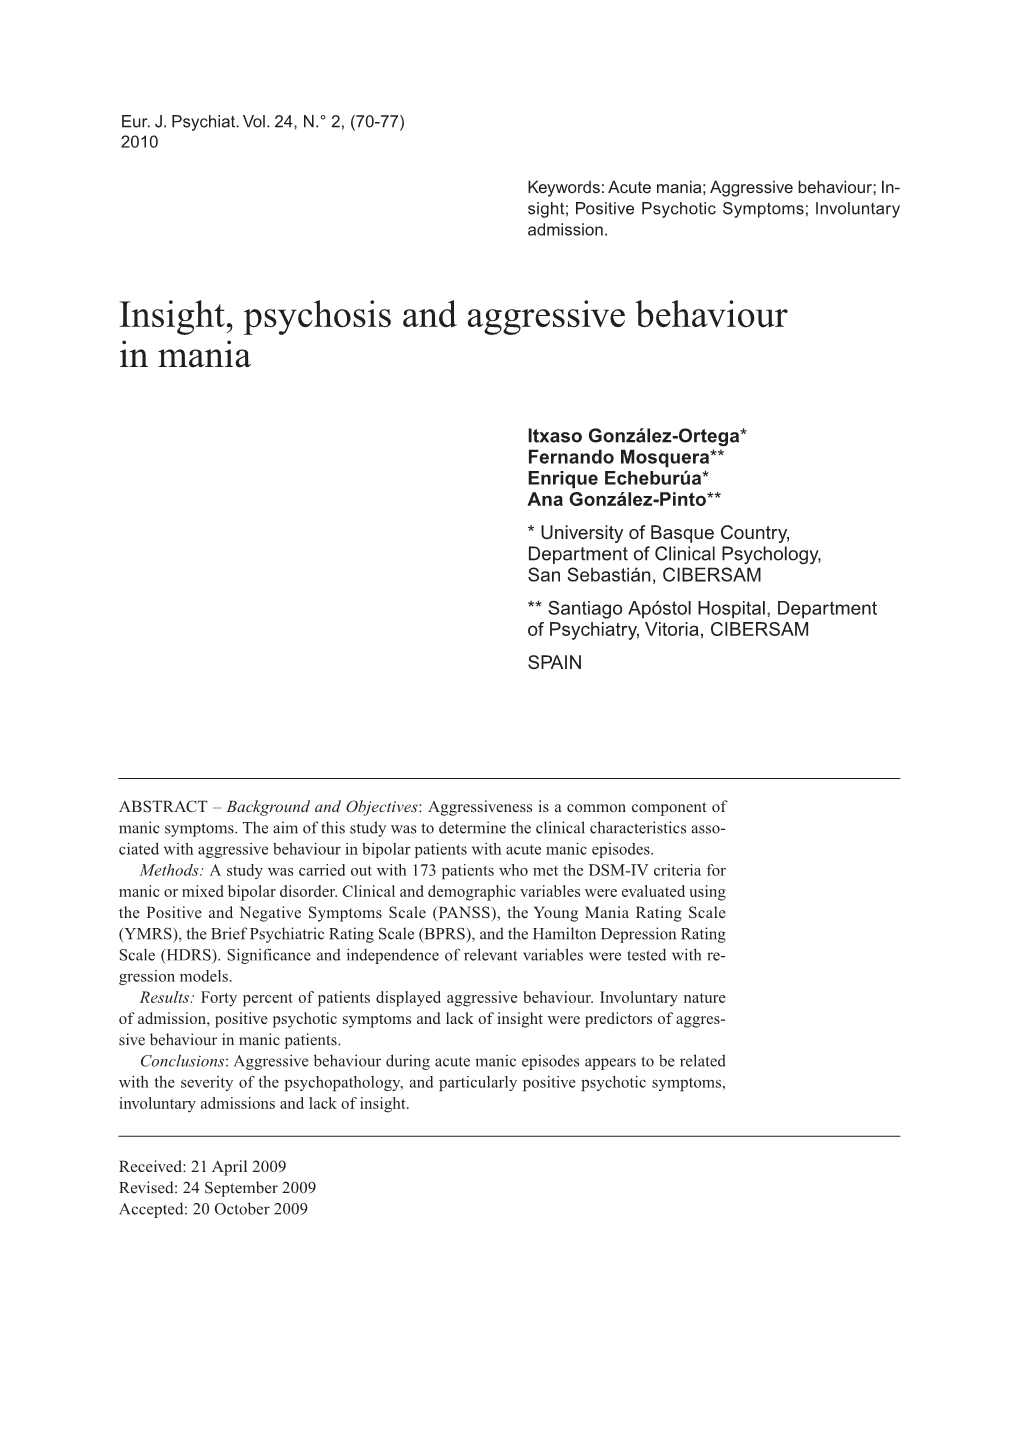 Insight, Psychosis and Aggressive Behaviour in Mania